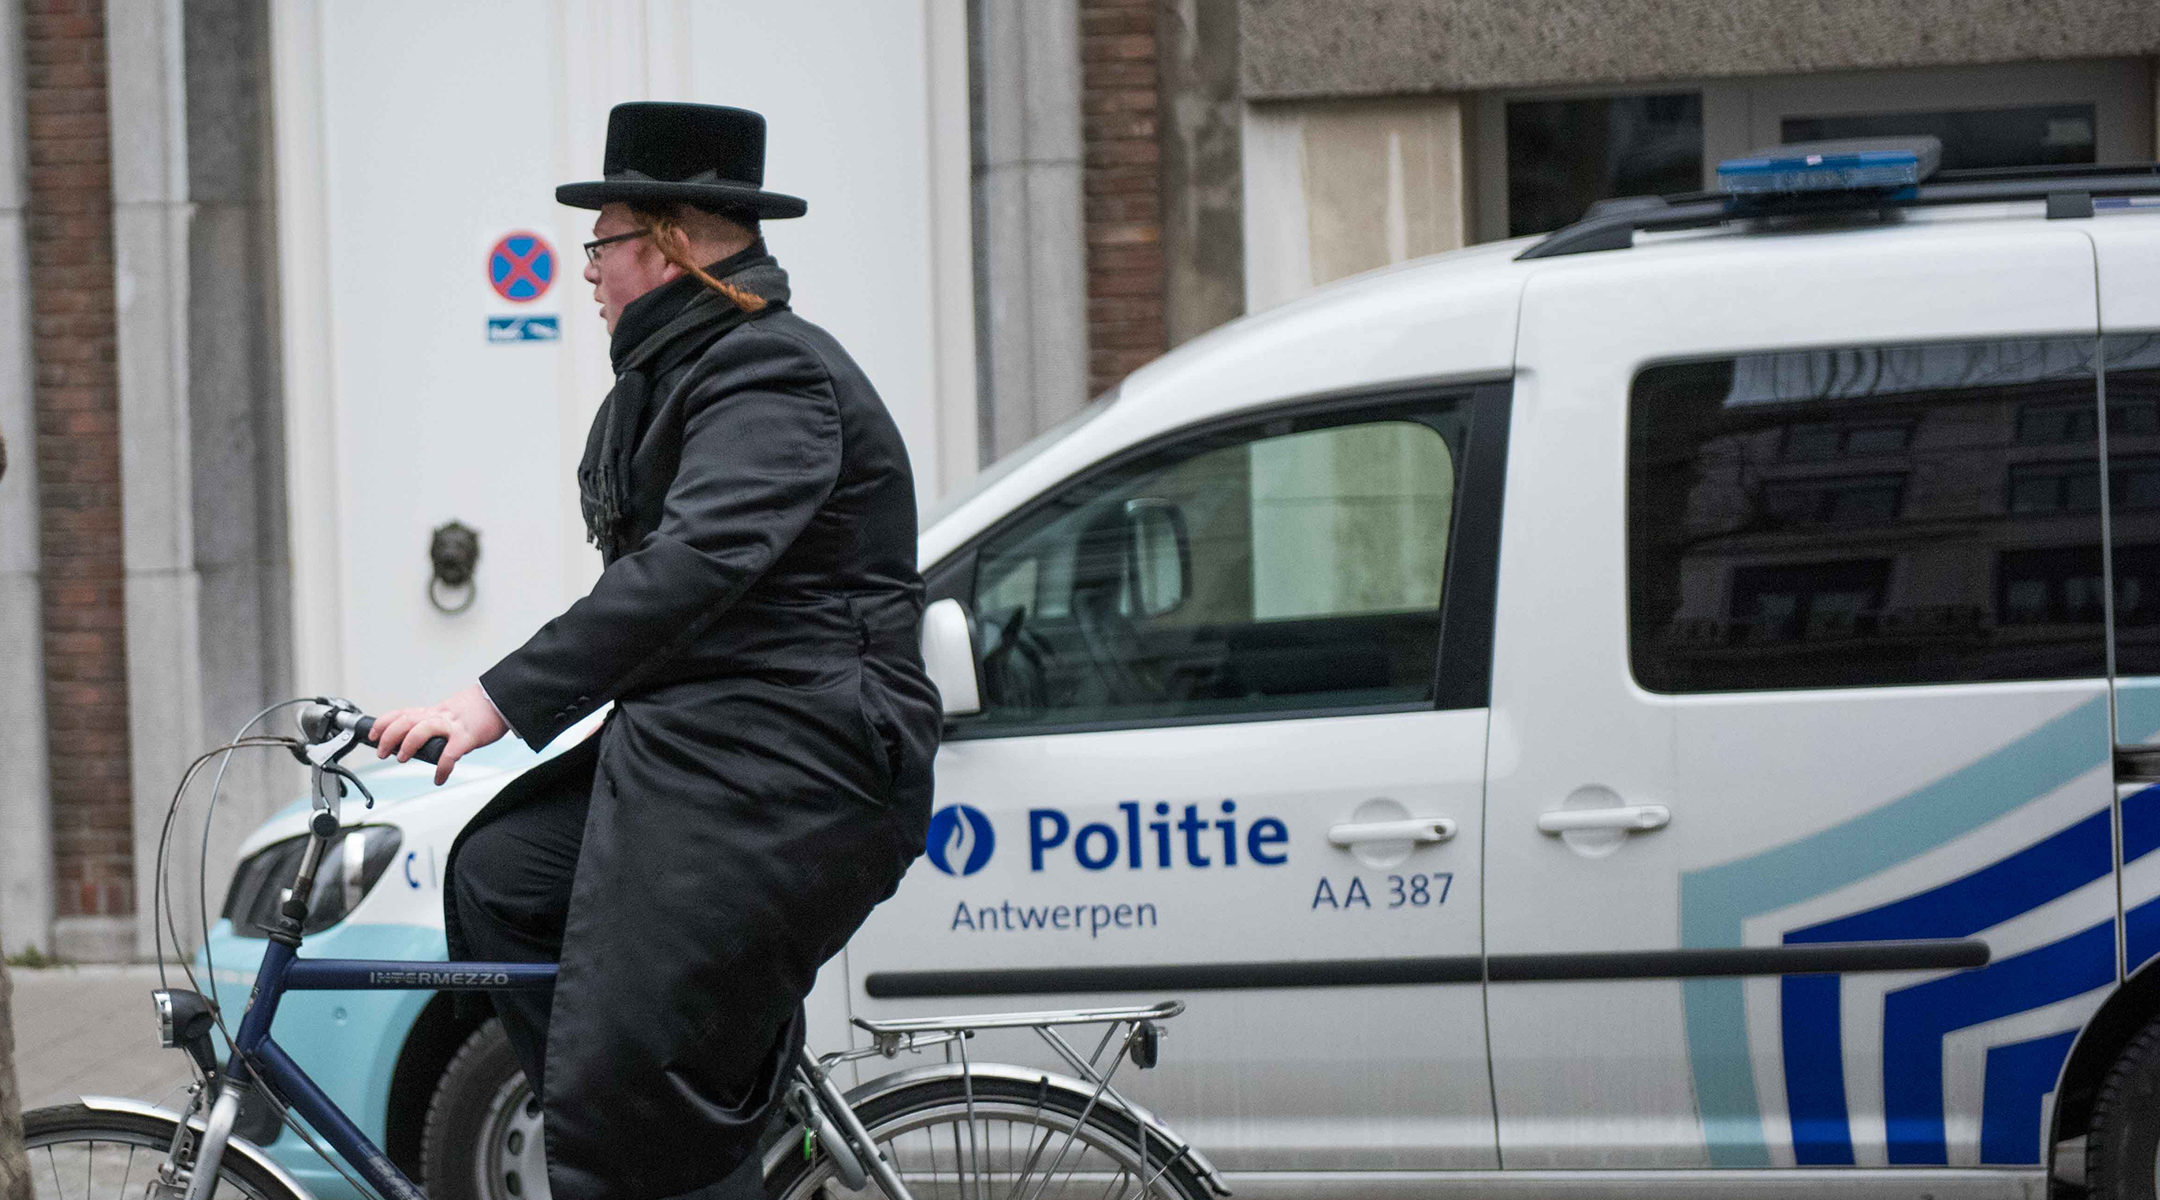 A haredi Jew cycling past a police car in Antwerp, Belgium on March 16, 2016. (Cnaan Liphshiz)